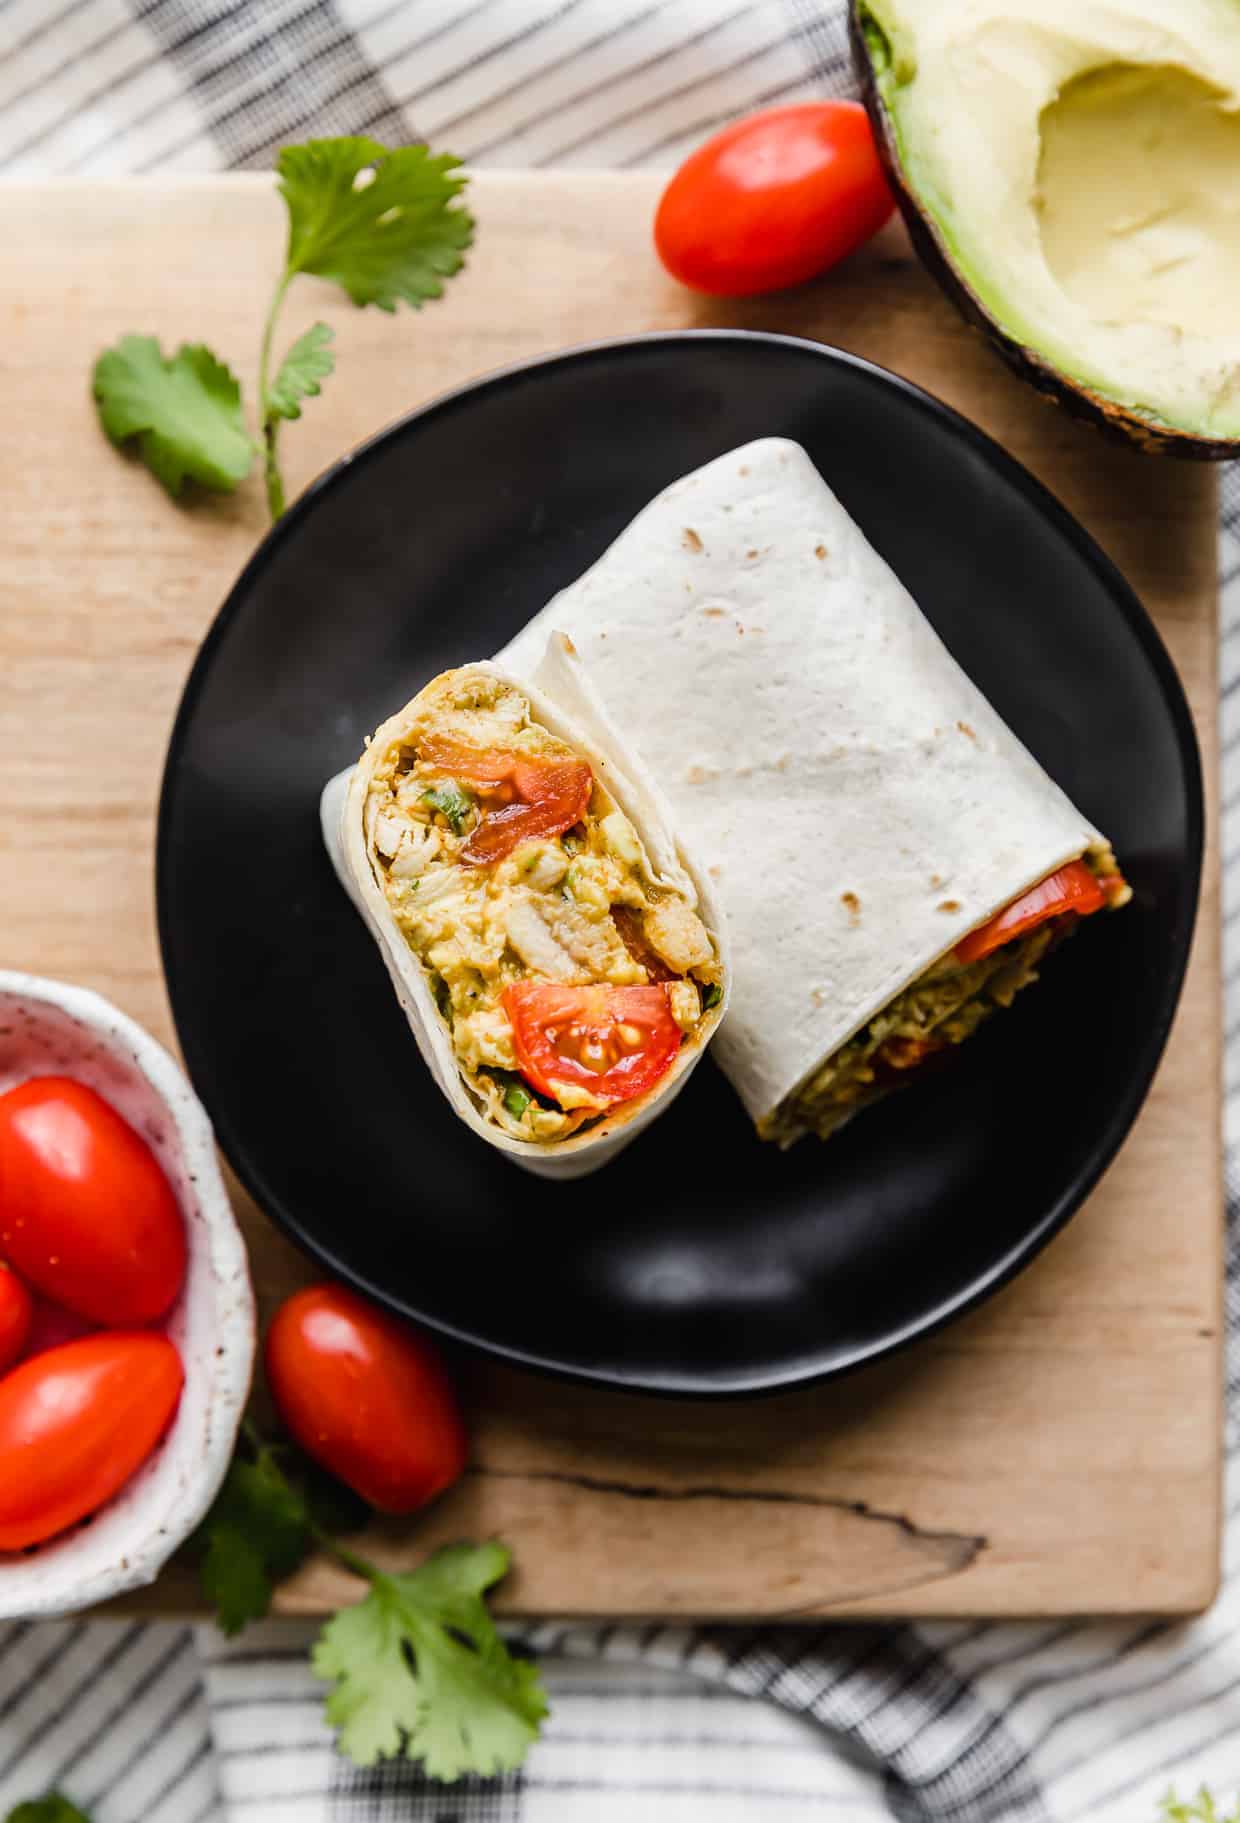 An Avocado Chicken Wrap on a black plate with grape tomatoes and sliced avocado surrounding it.